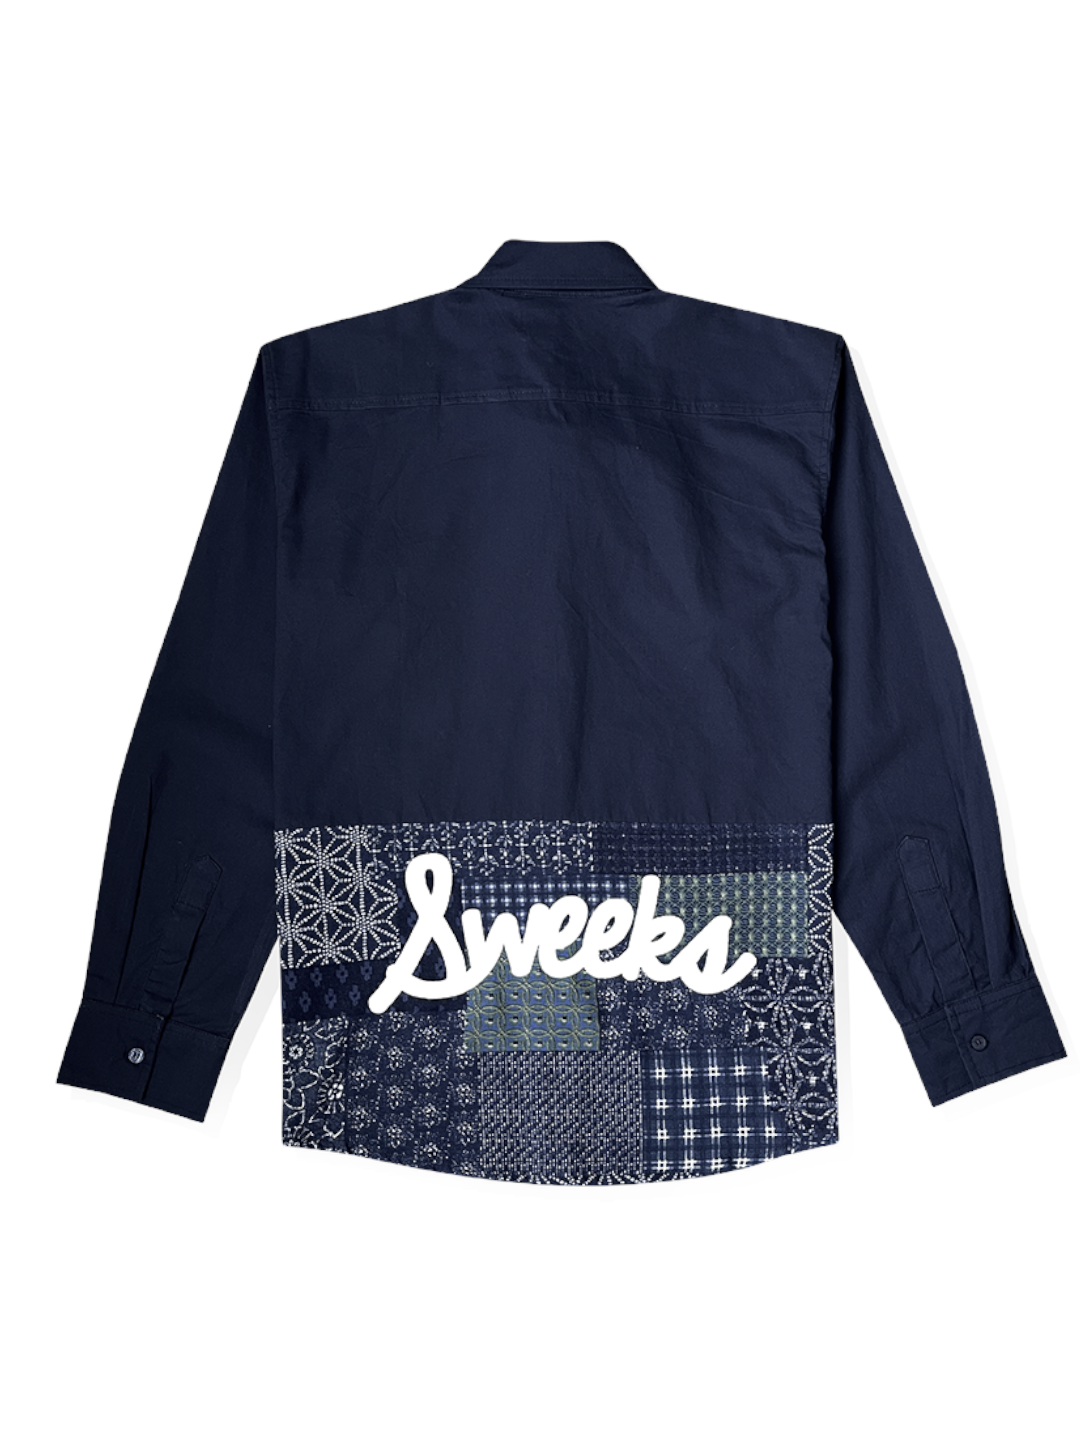 SW Layer Side L/S Shirt (Navy Blue)